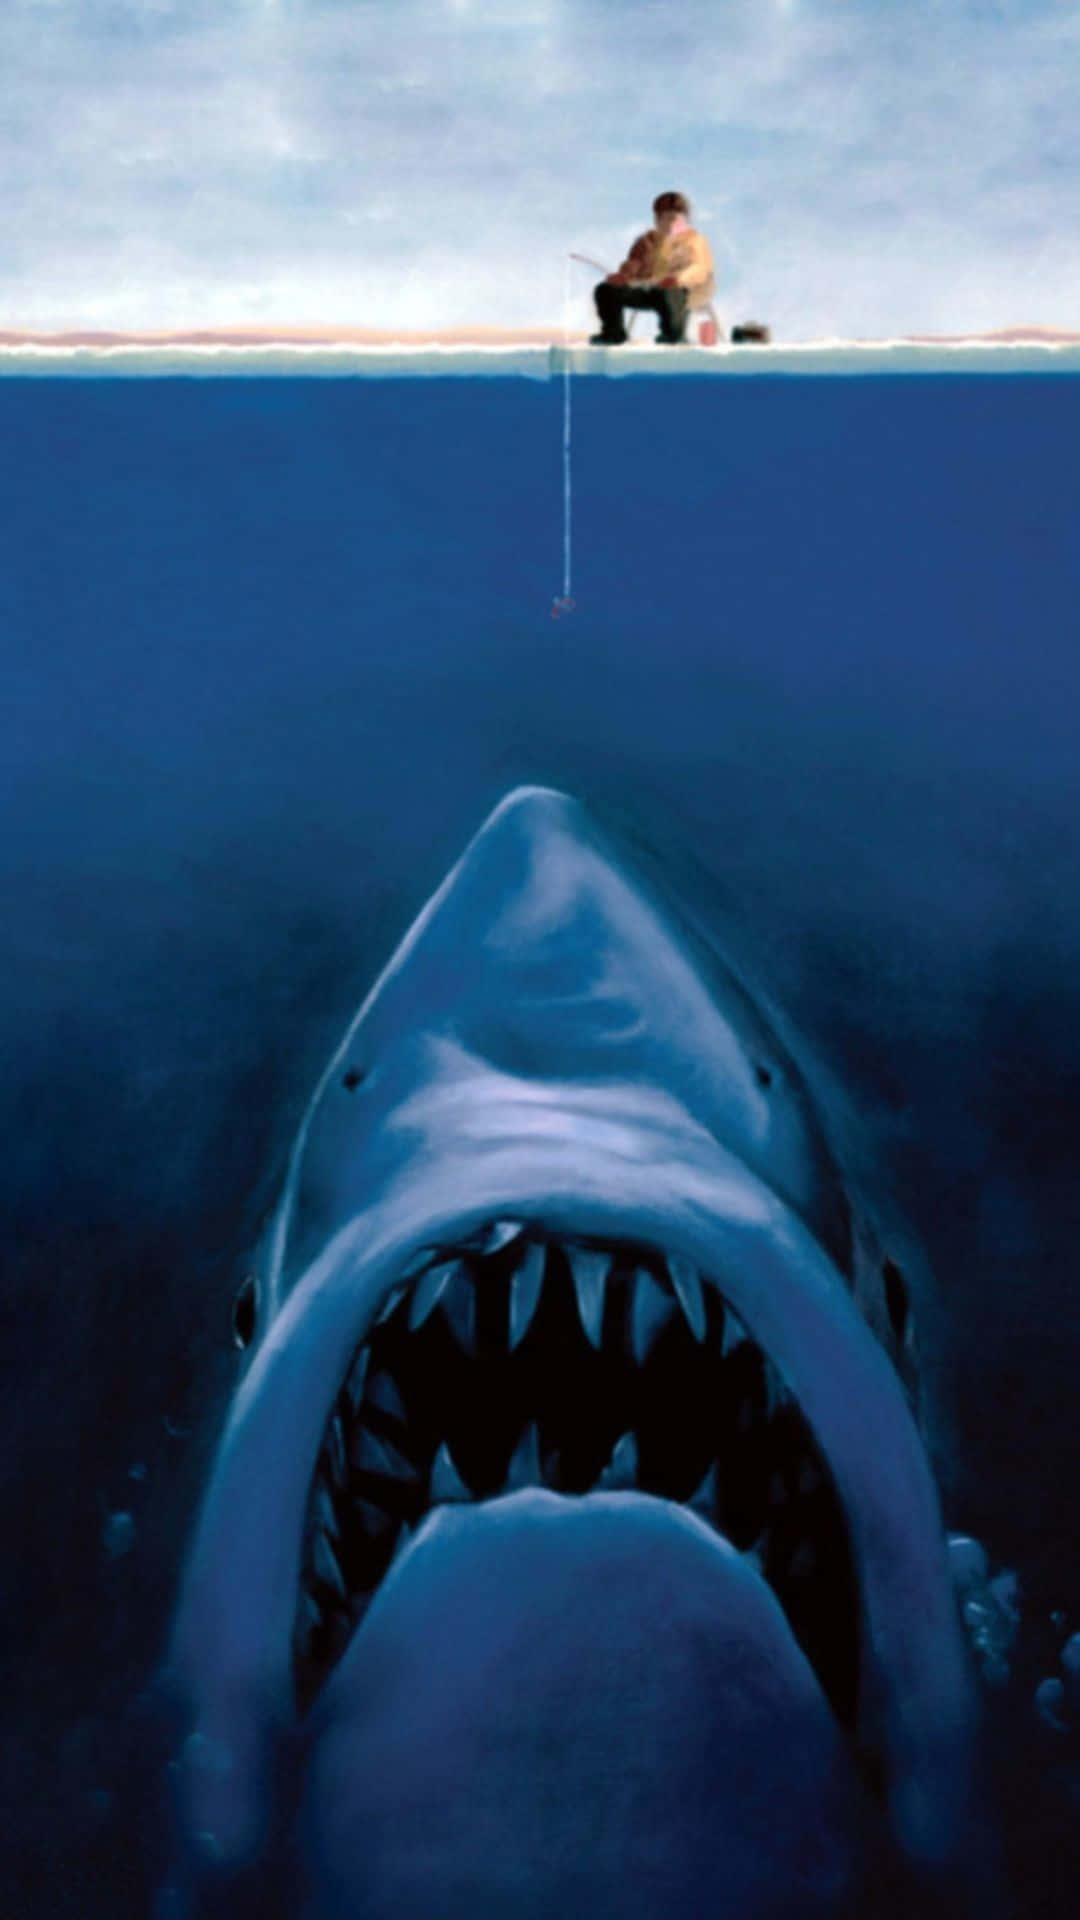 Get the sharpest iPhone with the new Shark iPhone Wallpaper